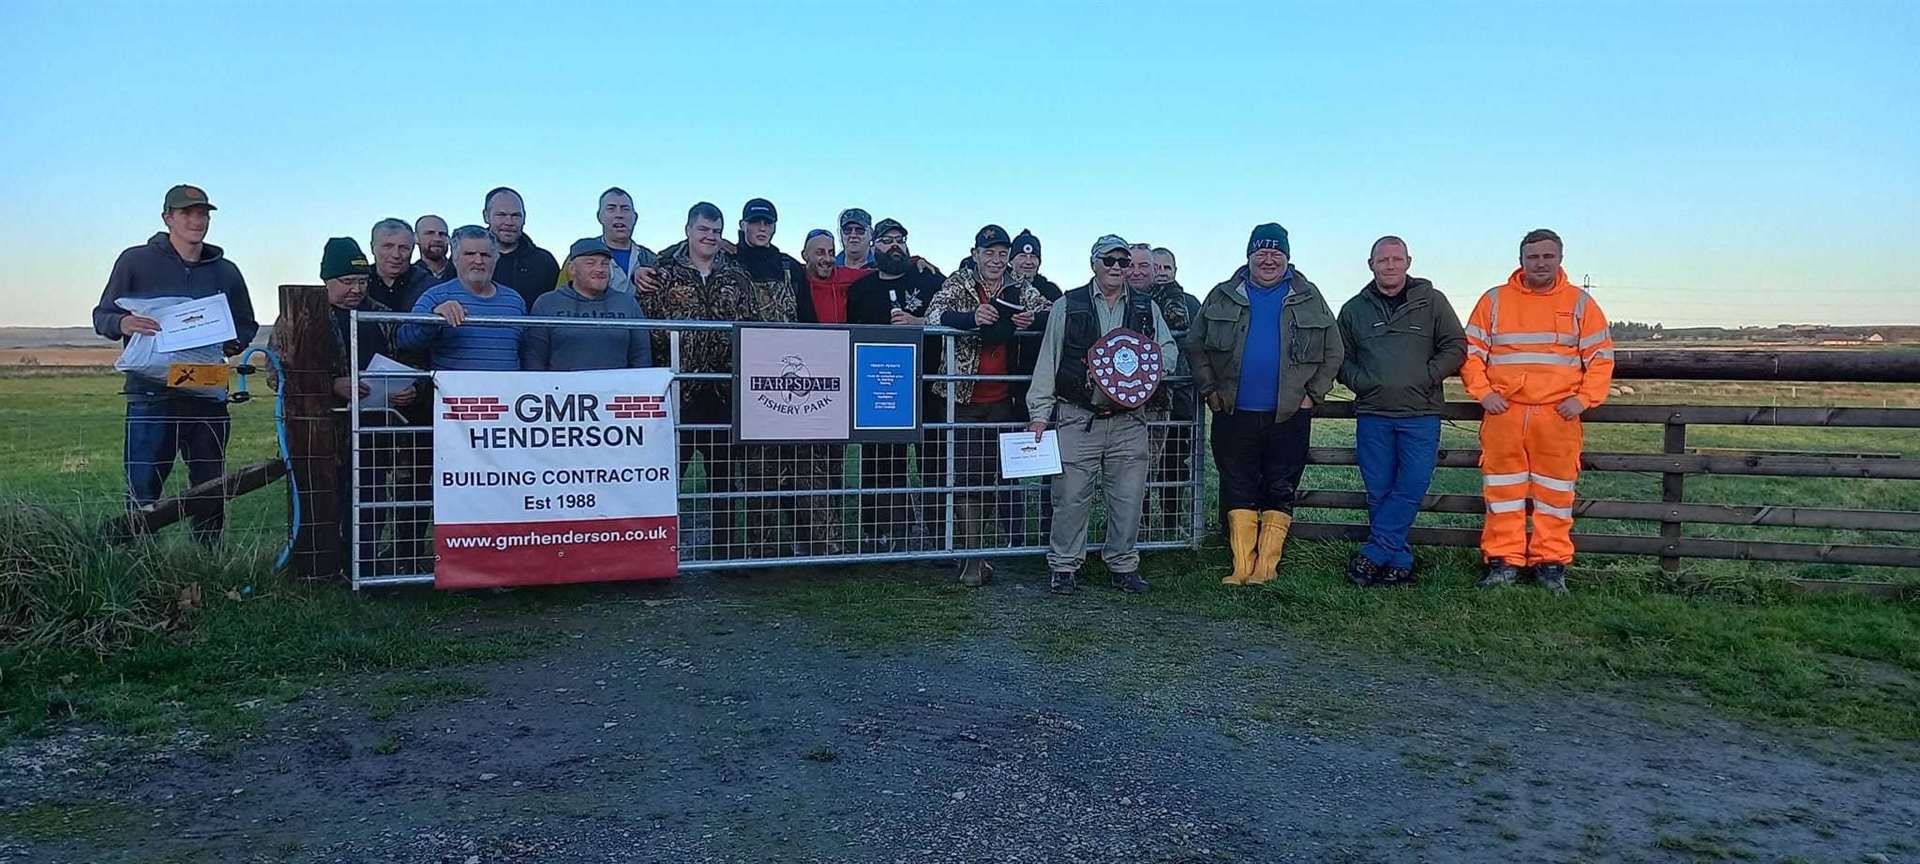 Prize-winners with other competitors and sponsors' representatives after the GMR Henderson Builders Ltd Autumn Open at Harpsdale Fishery Park.